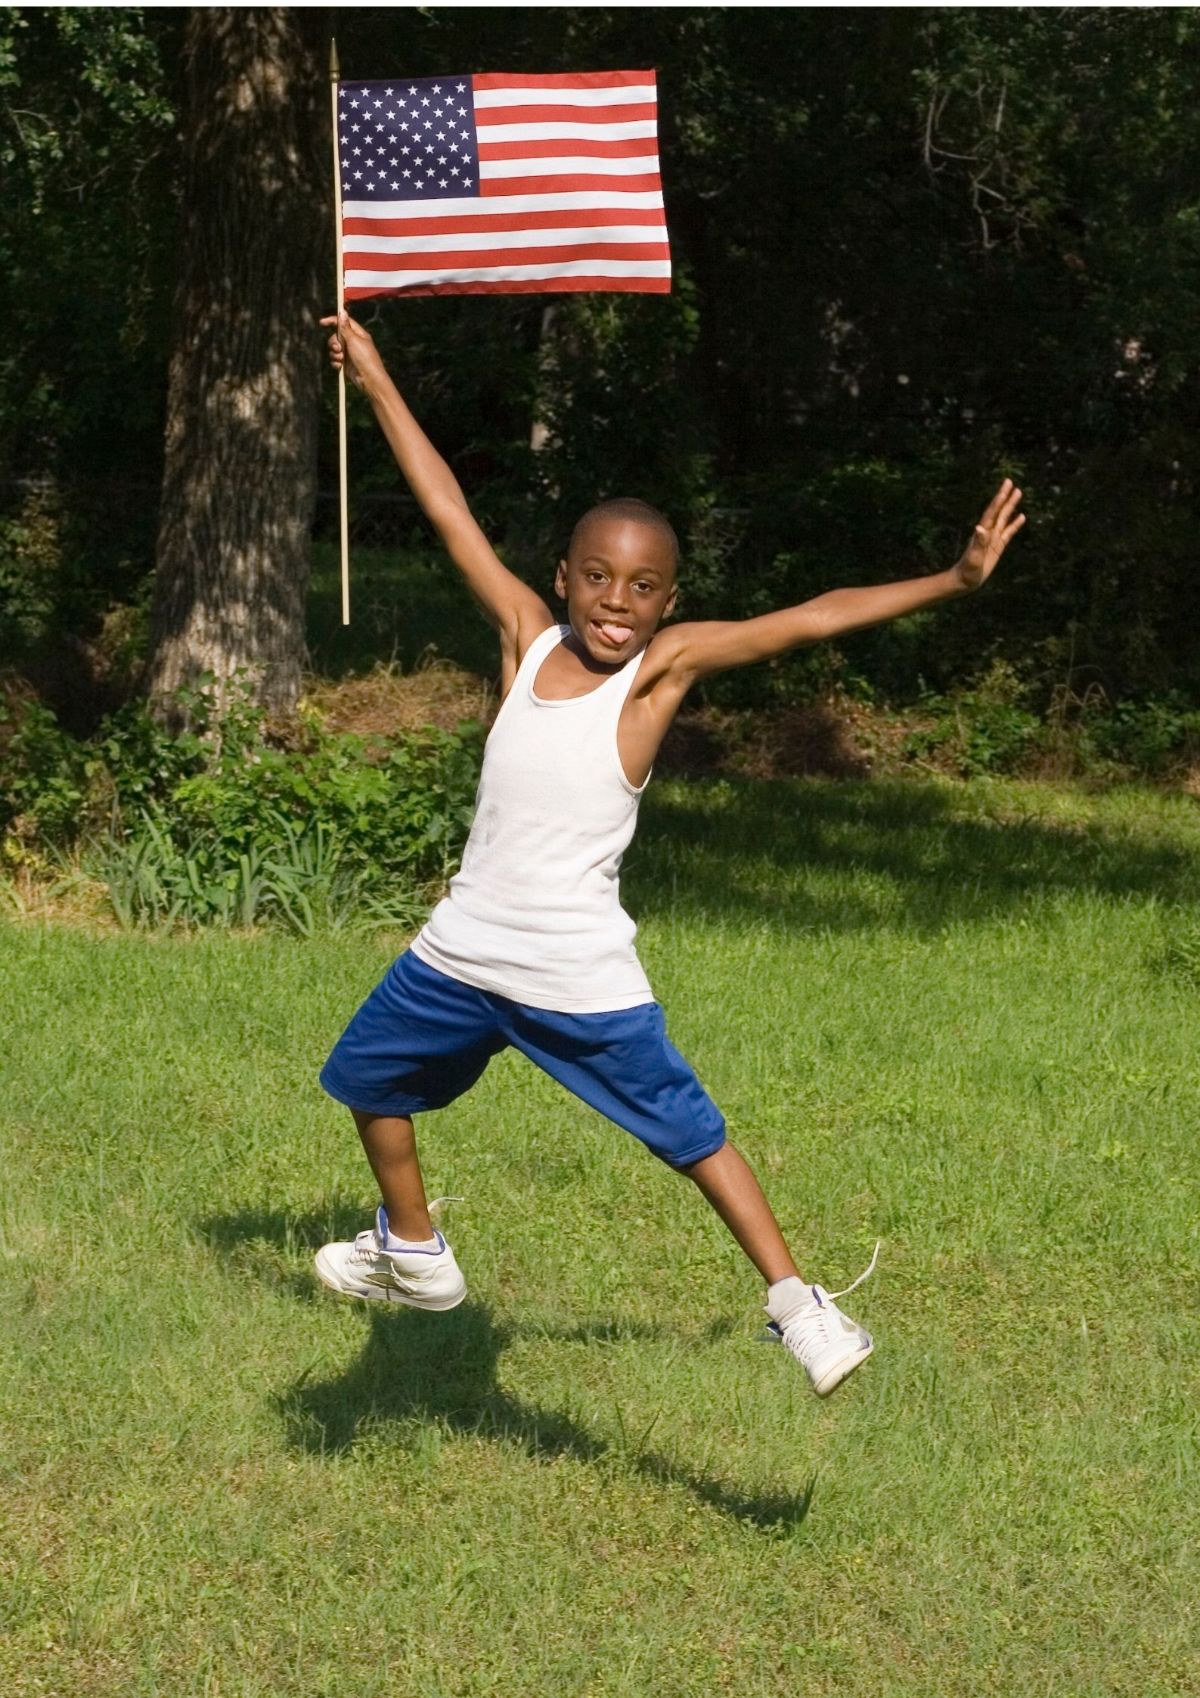 a boy holds an american flag in a field, while jumping in the air